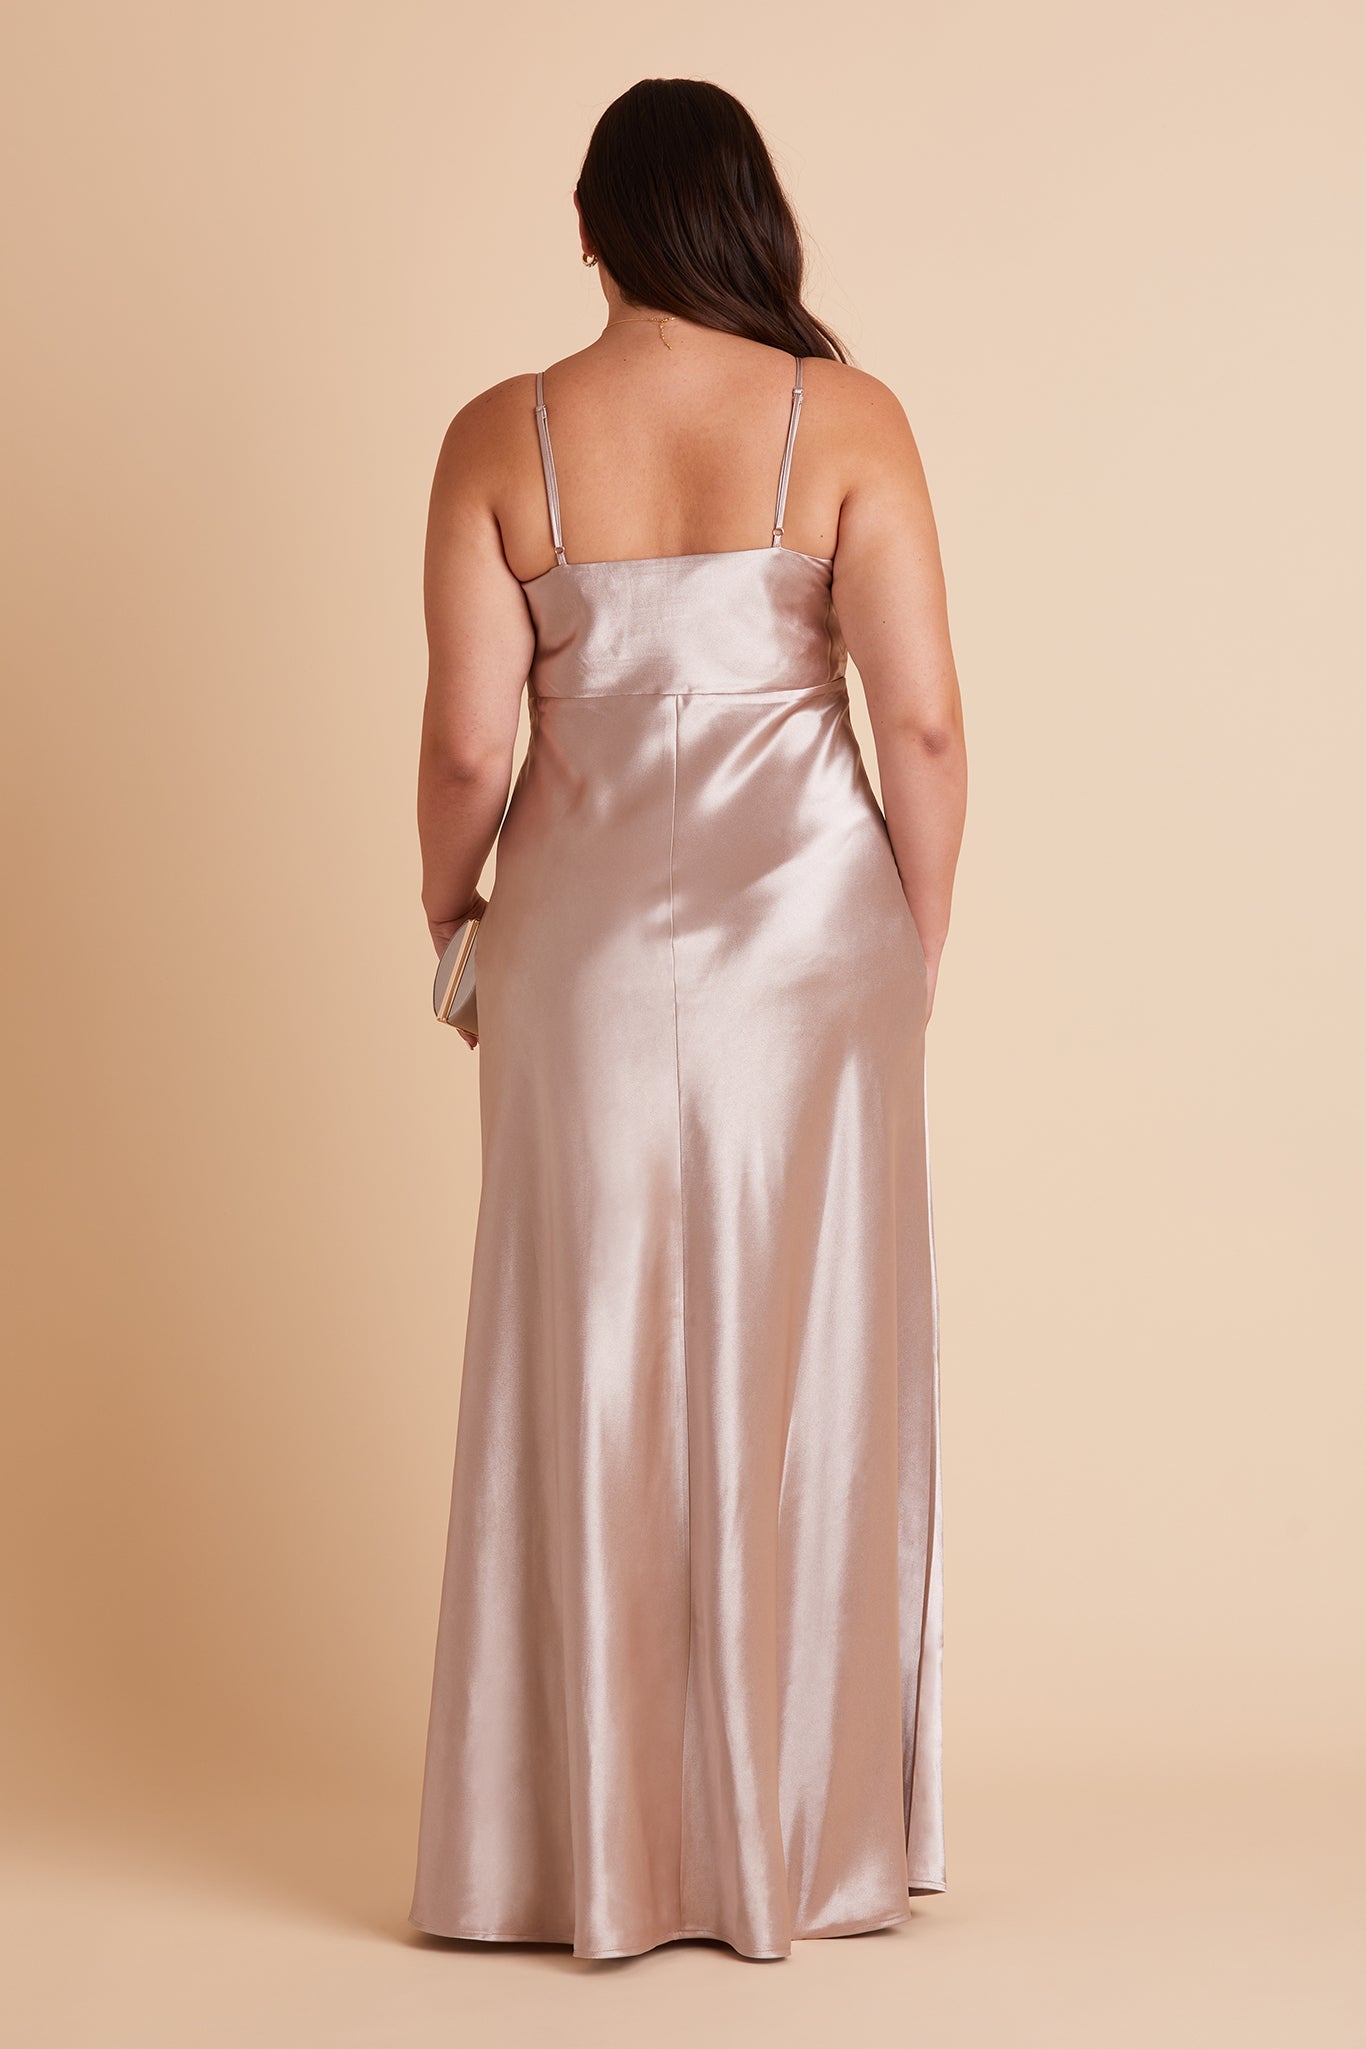 Back view of the Lisa Long Dress Curve in taupe satin shows the back of the dress with adjustable spaghetti straps and a smooth fit in the bodice and waist that attach to a full length skirt.  